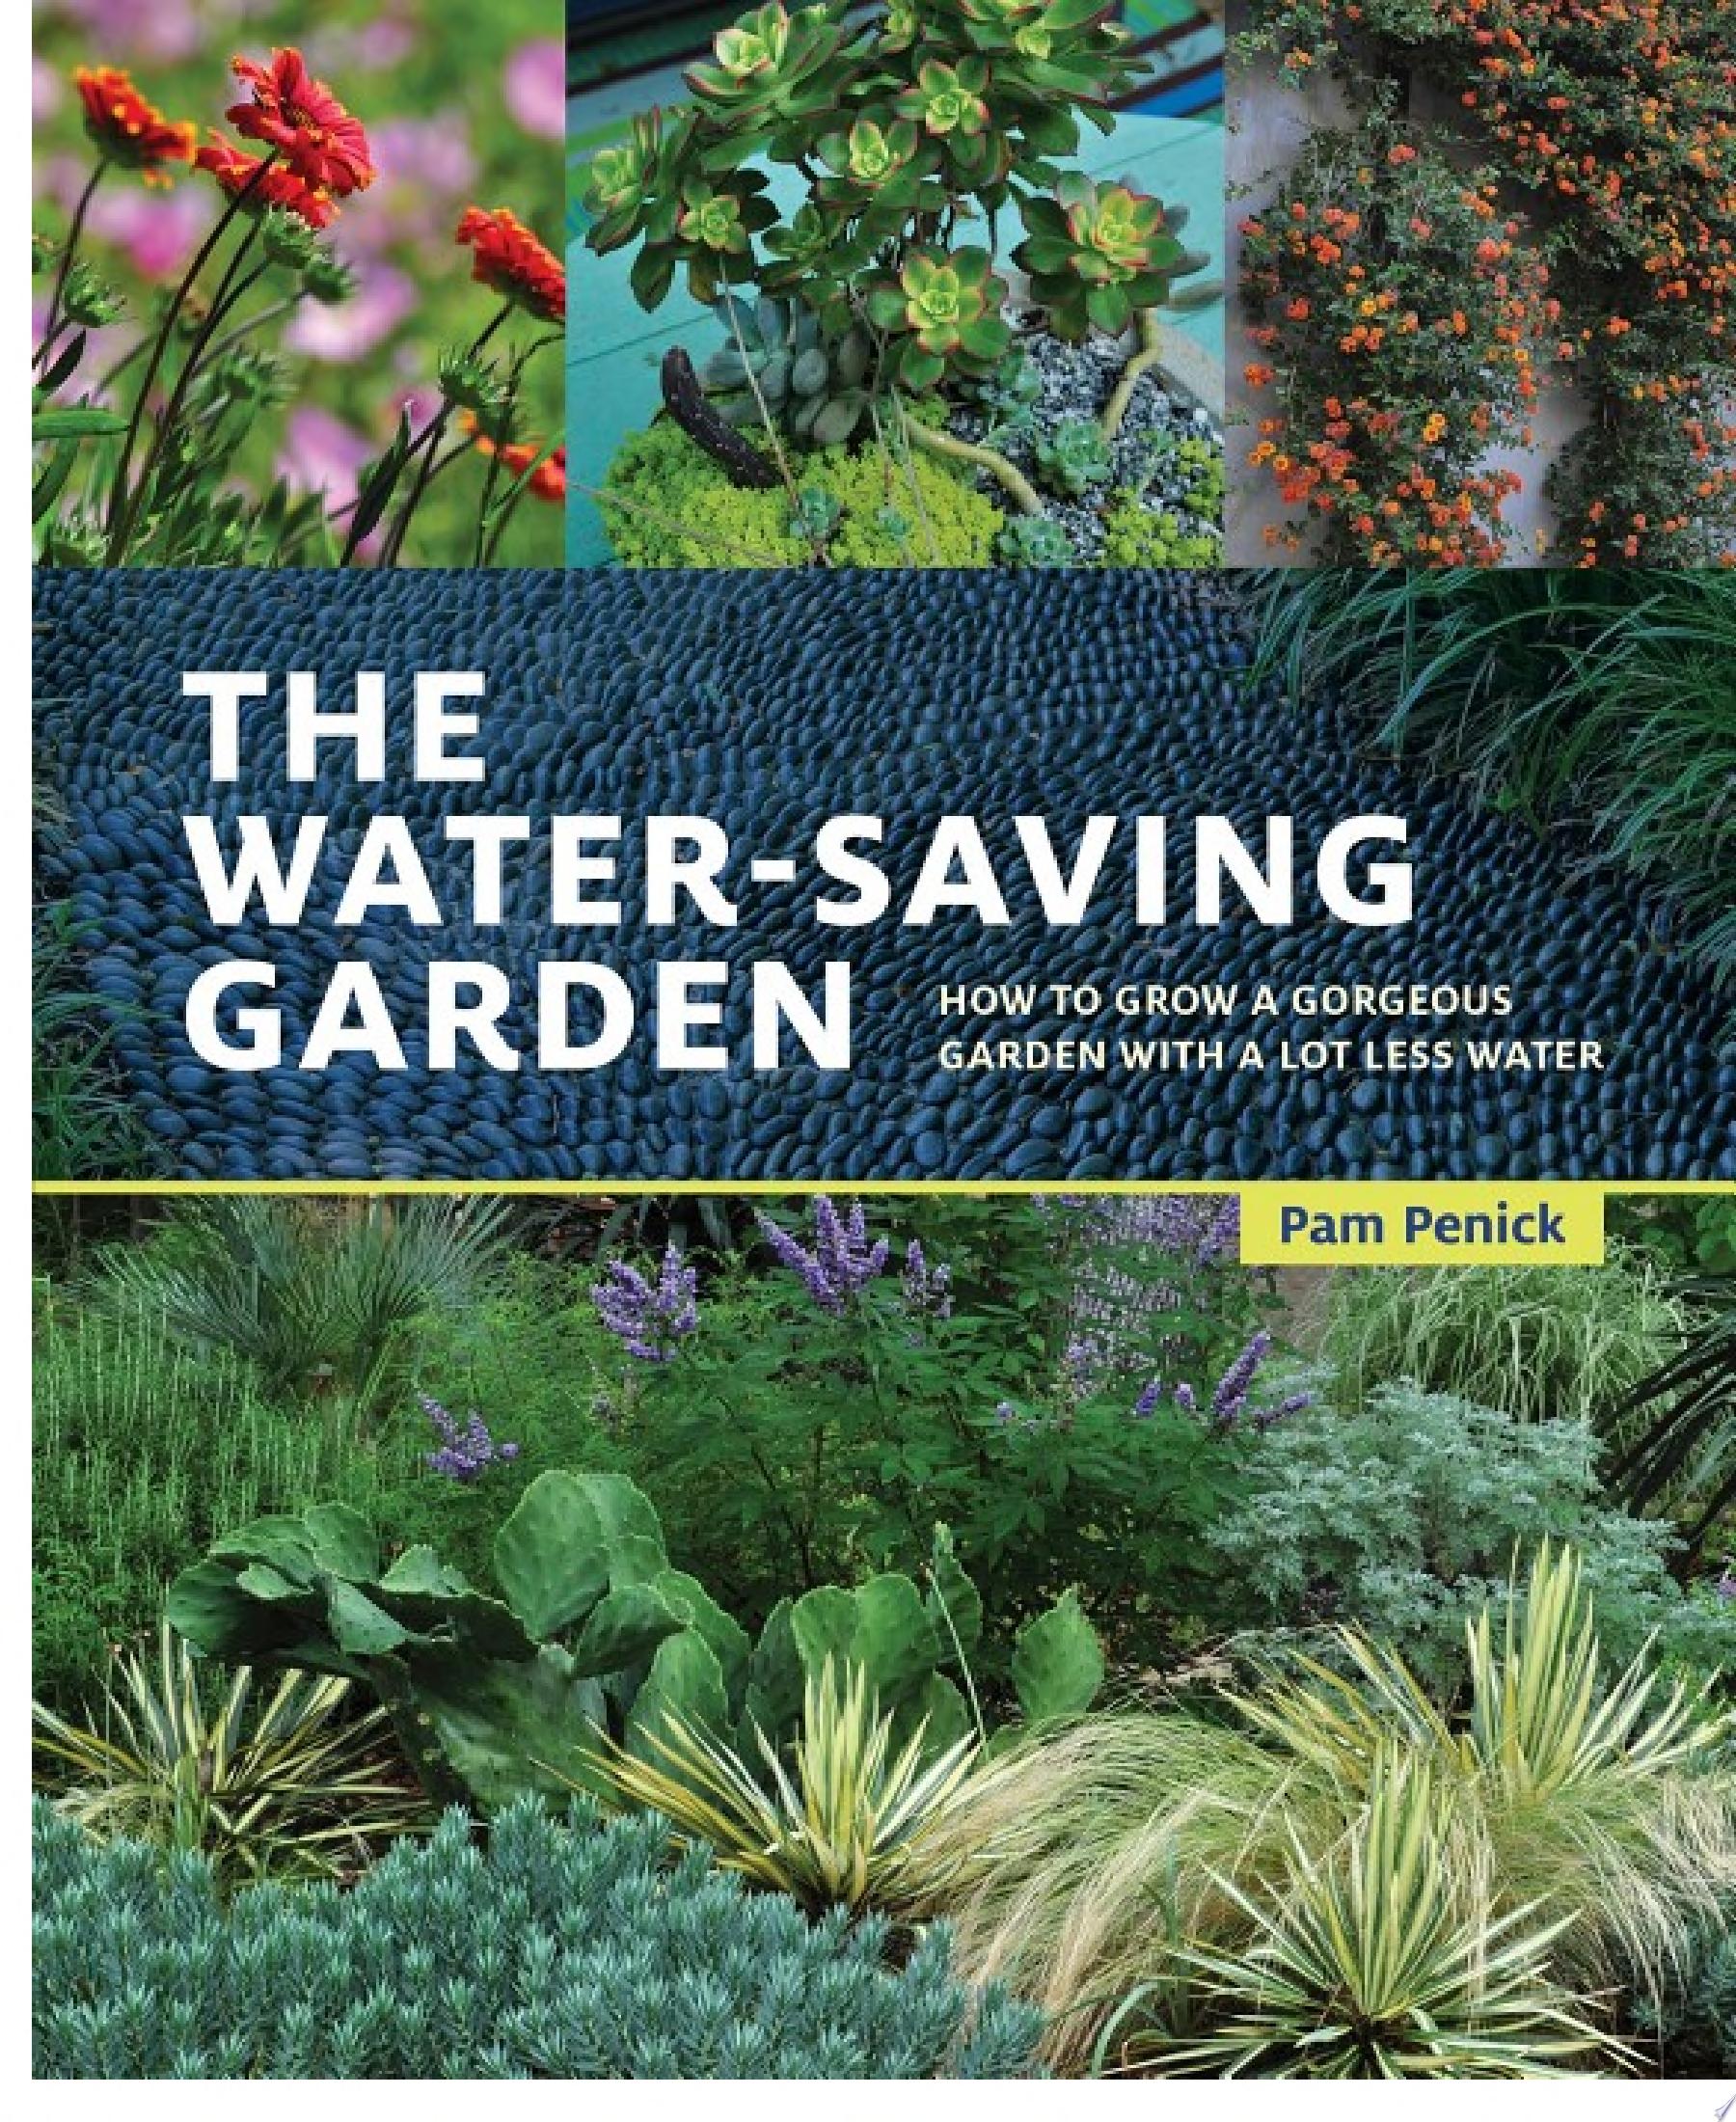 Image for "The Water-Saving Garden"